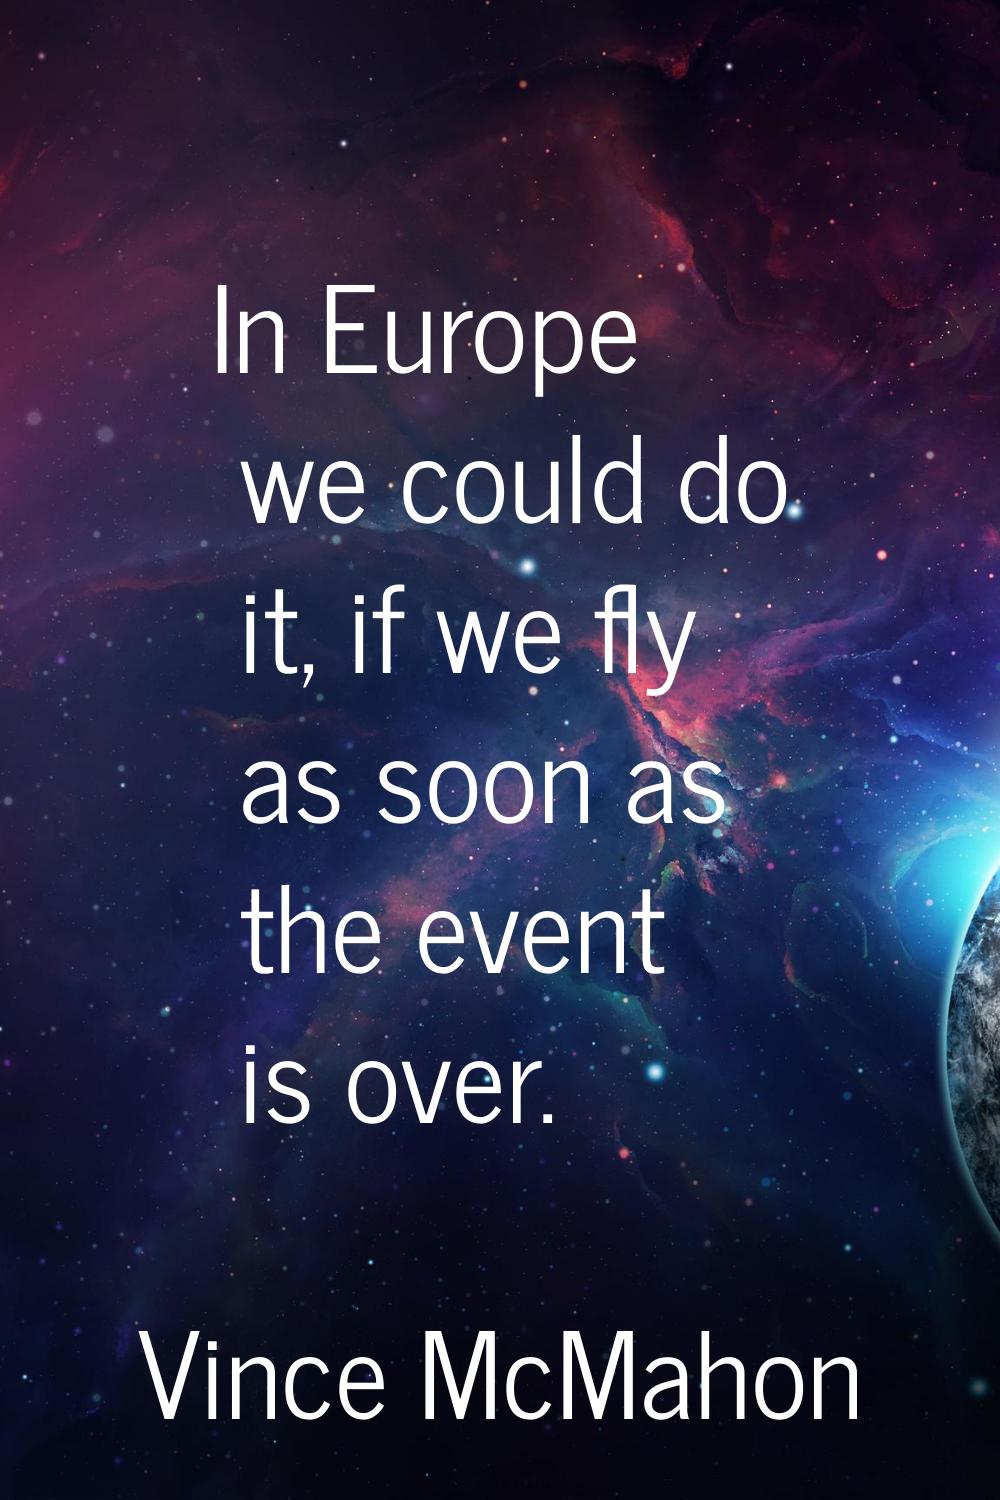 In Europe we could do it, if we fly as soon as the event is over.